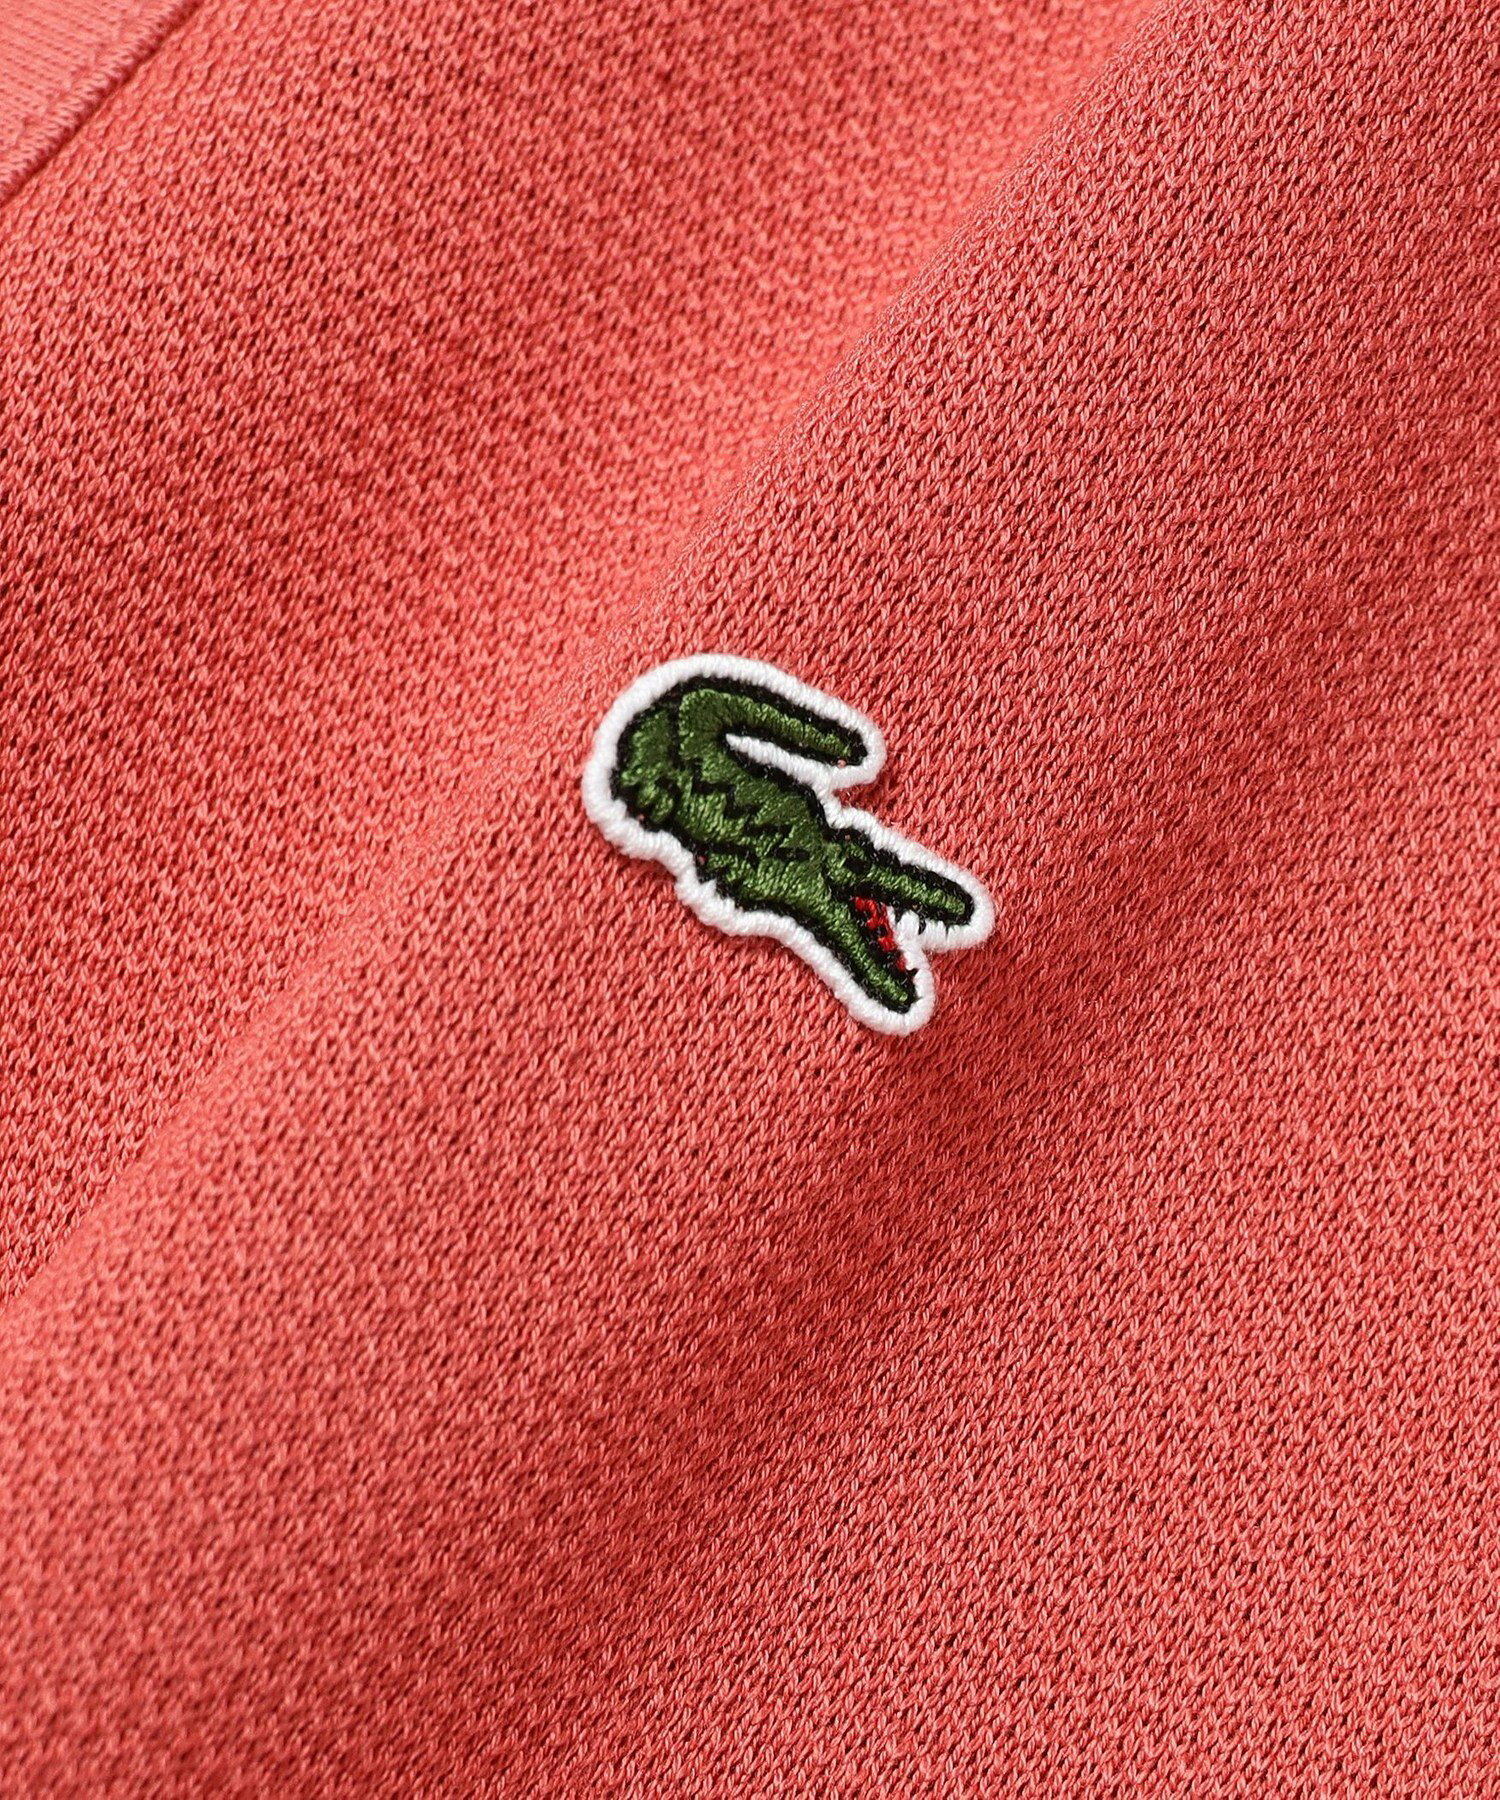 LACOSTE for B:MING by BEAMS / 別注 カノコ ハーフスリーブ Tシャツ 24SS ウォッシャブル イージーケア